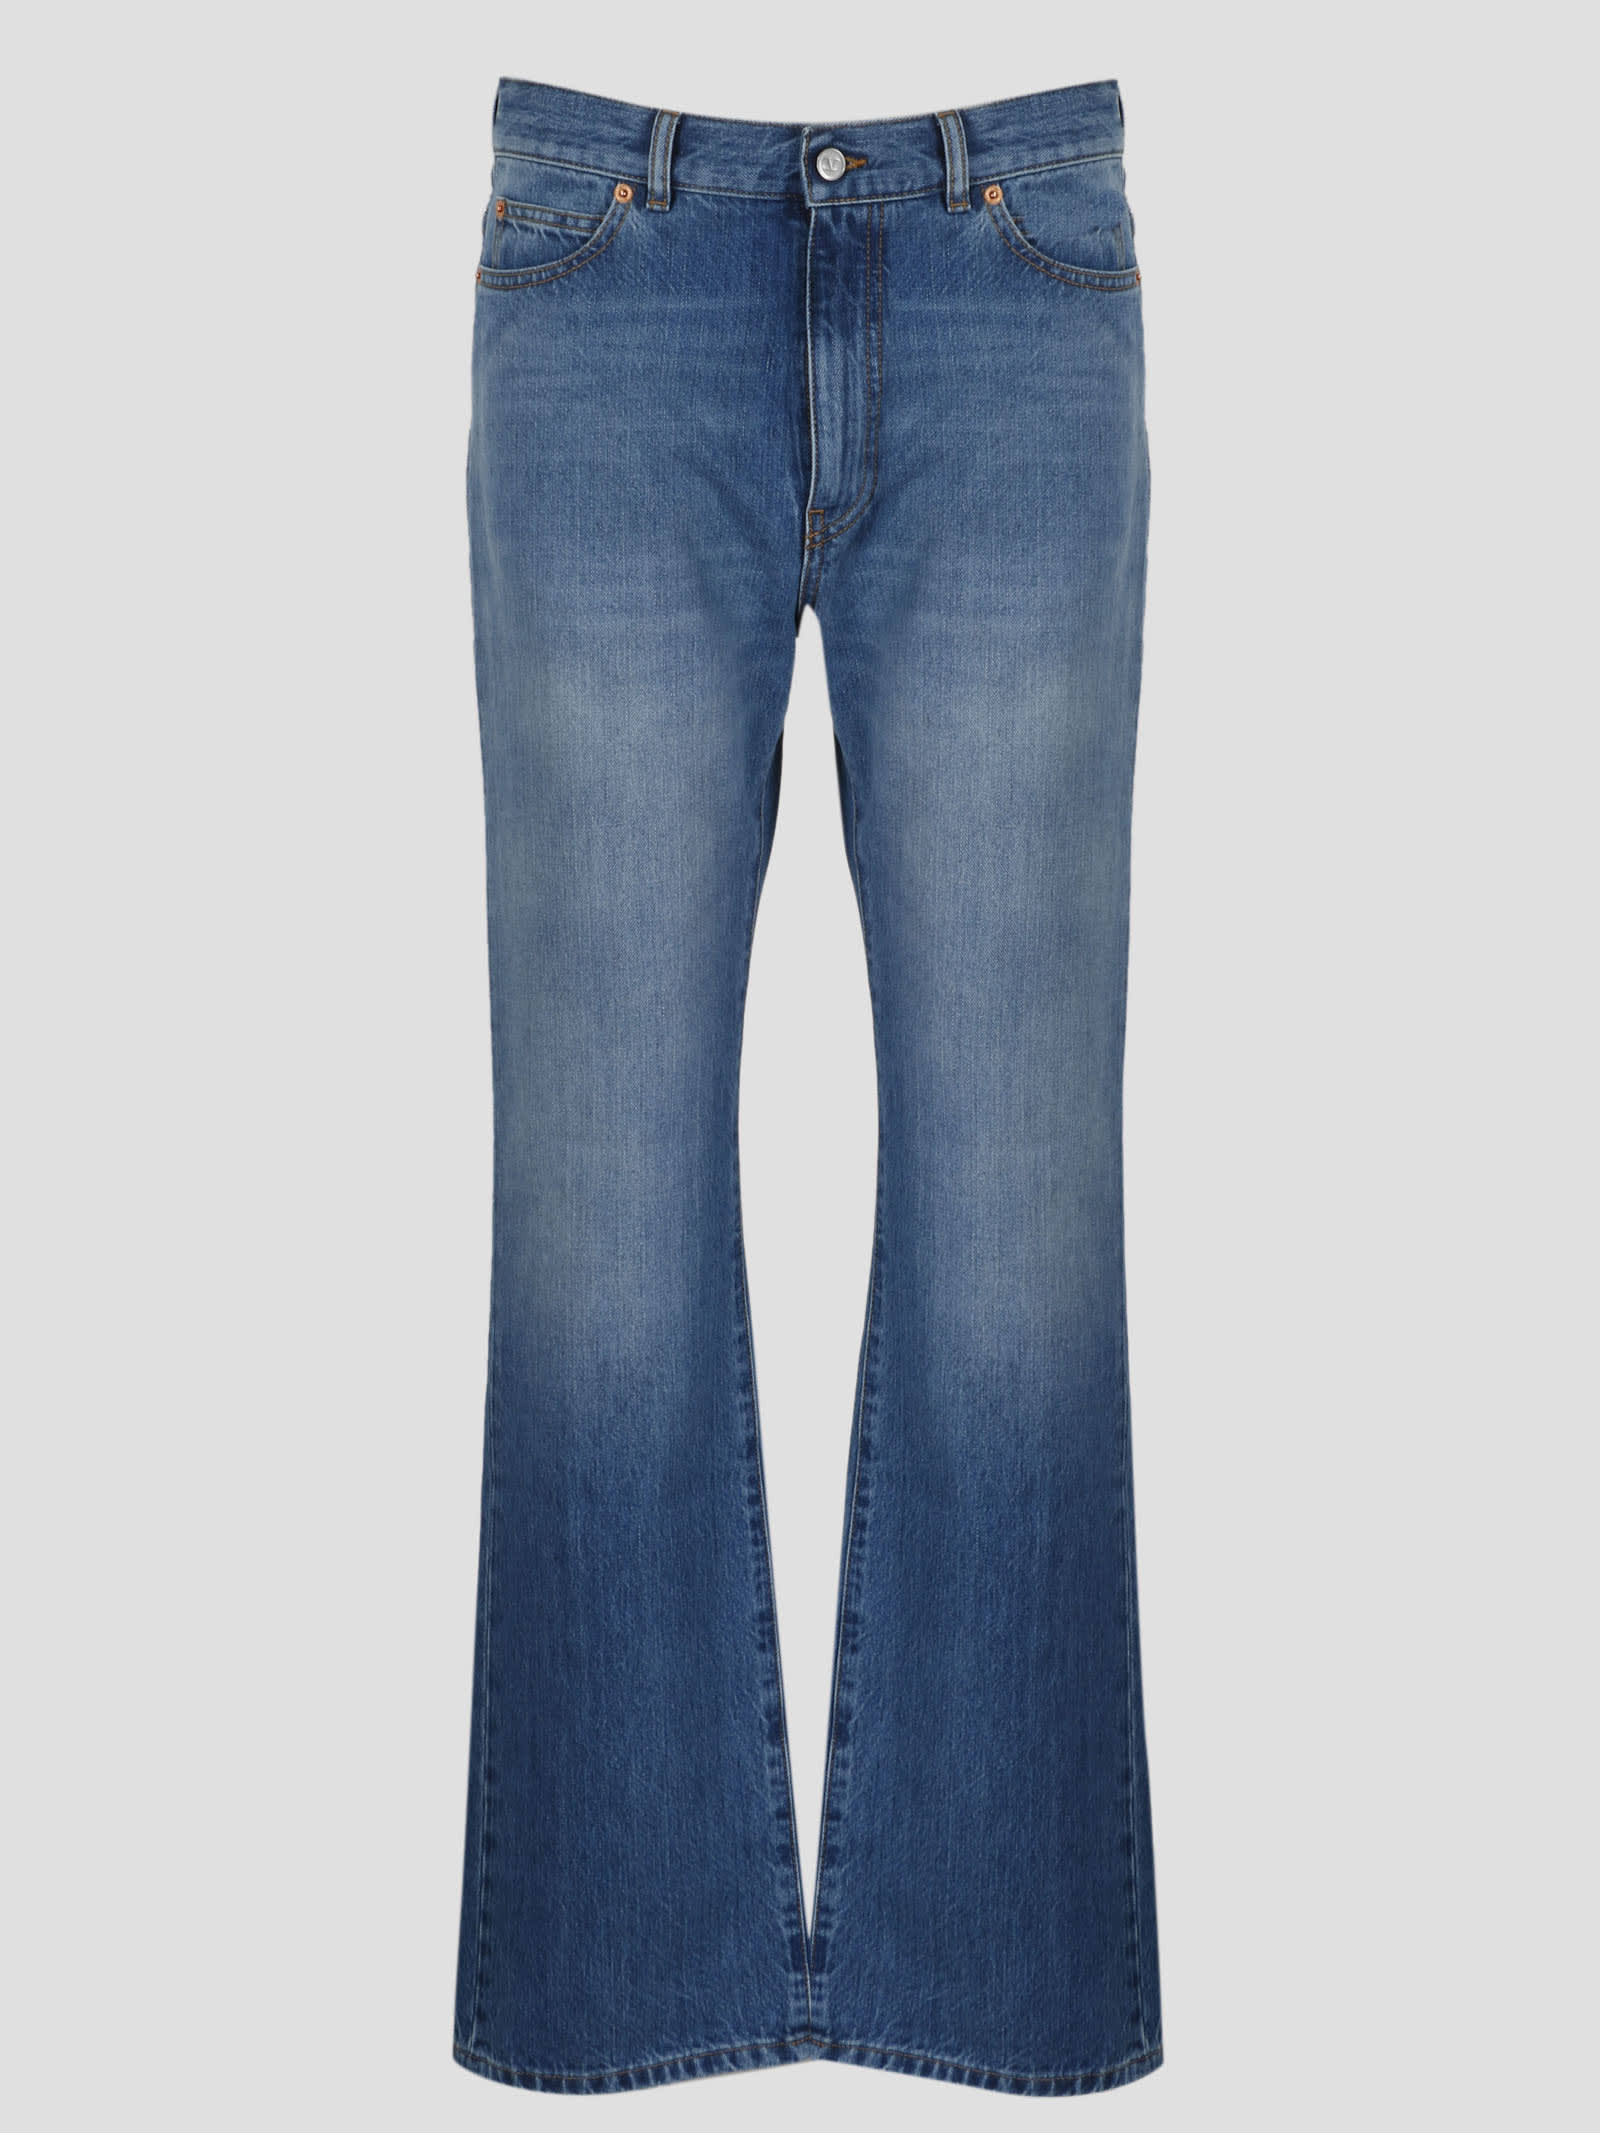 Valentino 1985 Archive Print Jeans In Blue